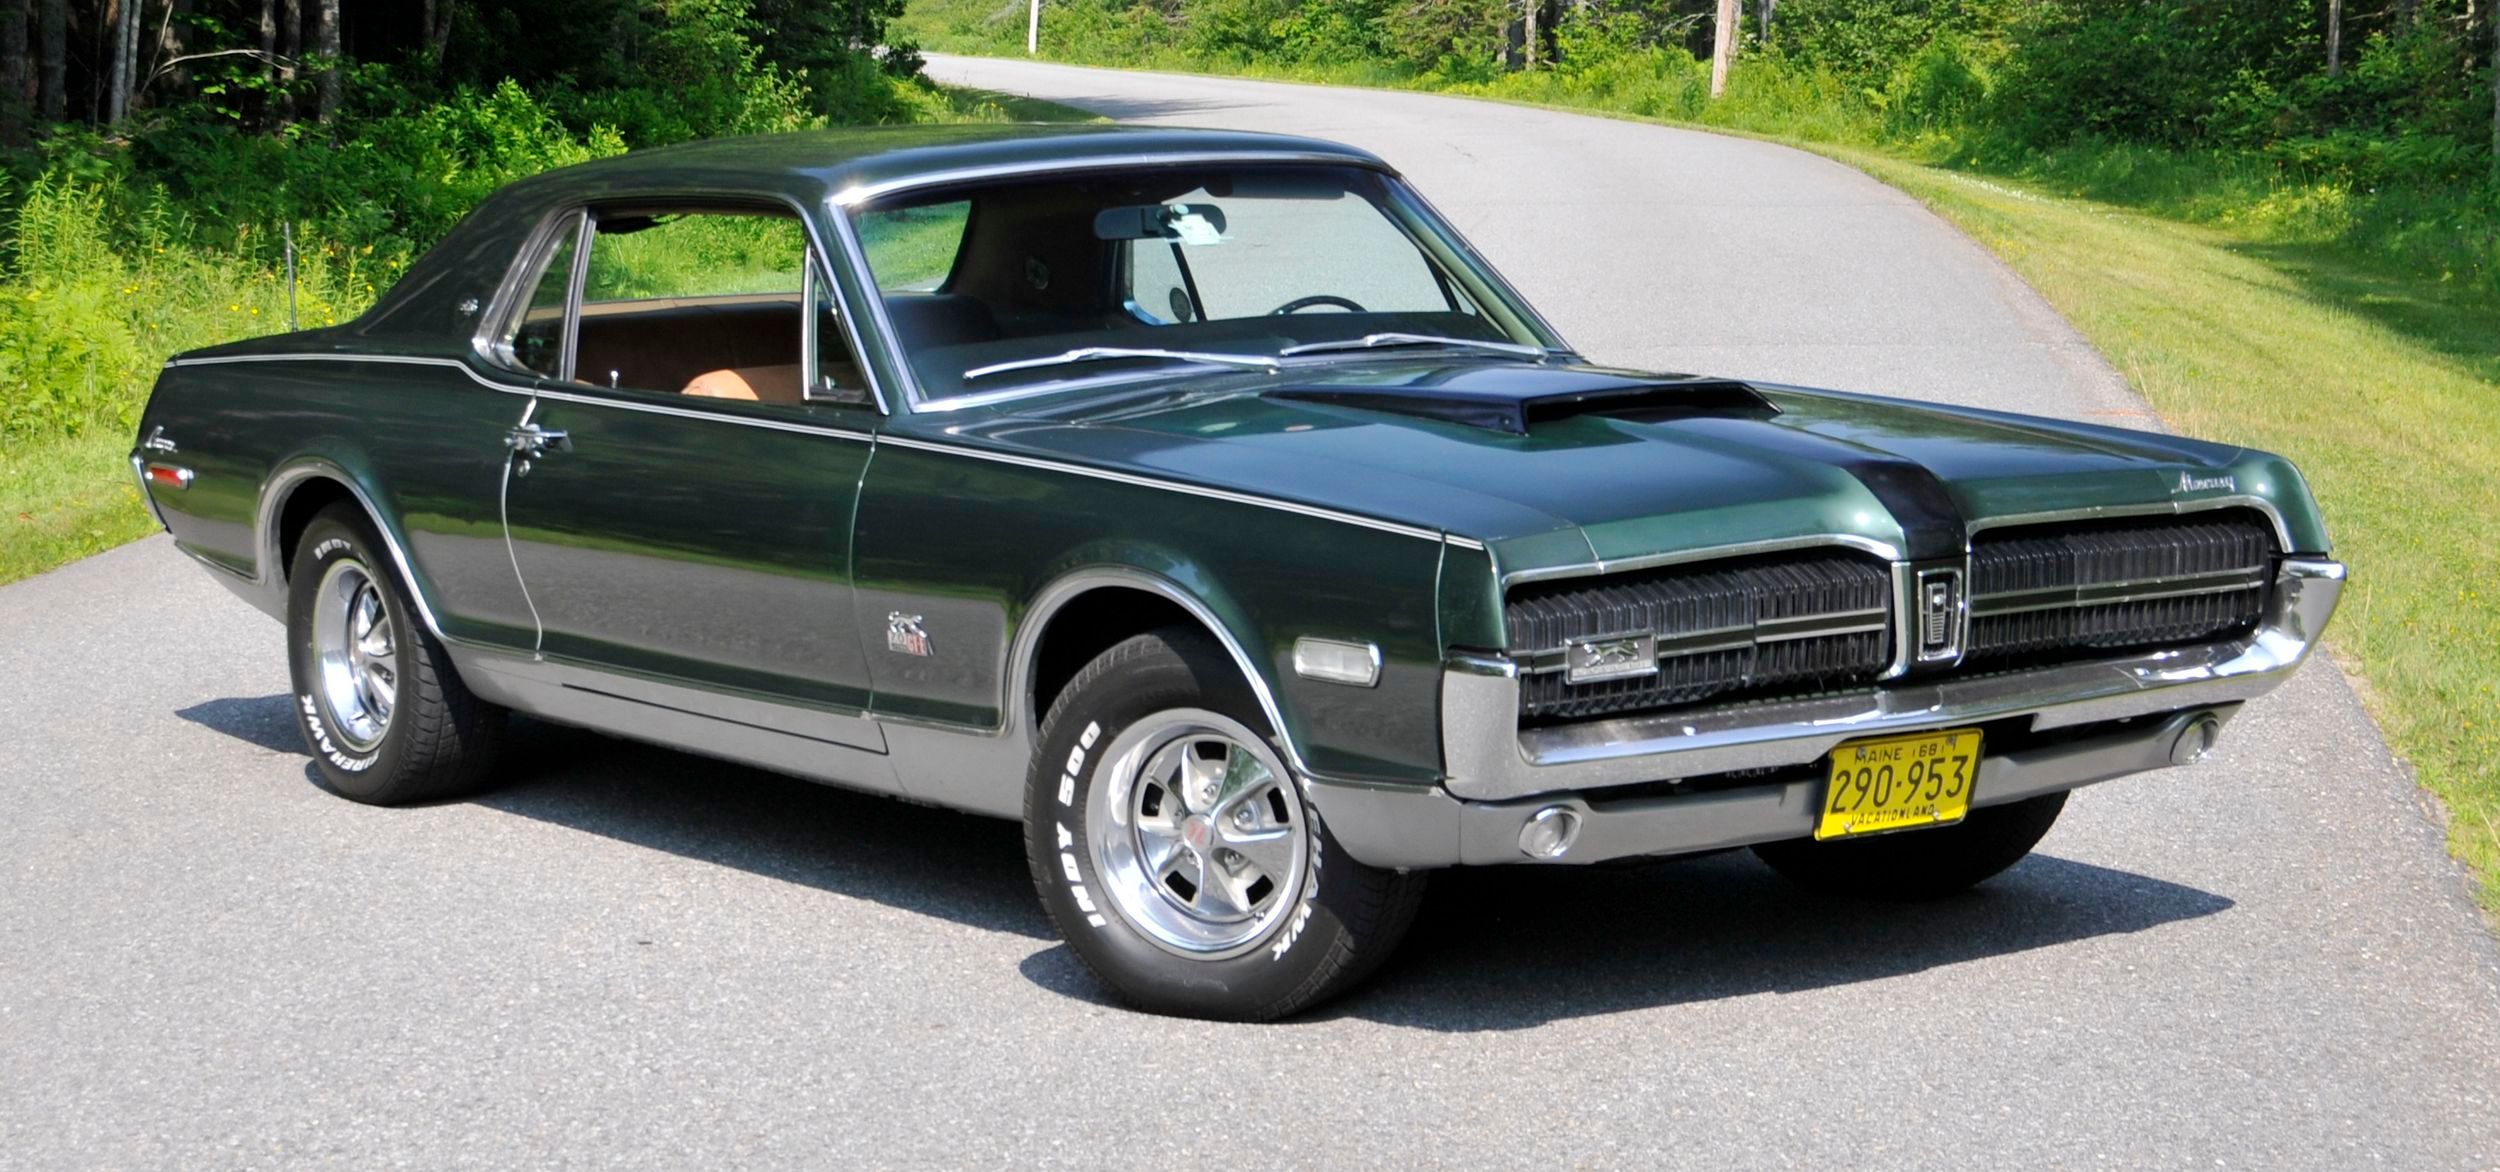 1968 Mercury Cougar GT-E in the middle of the road